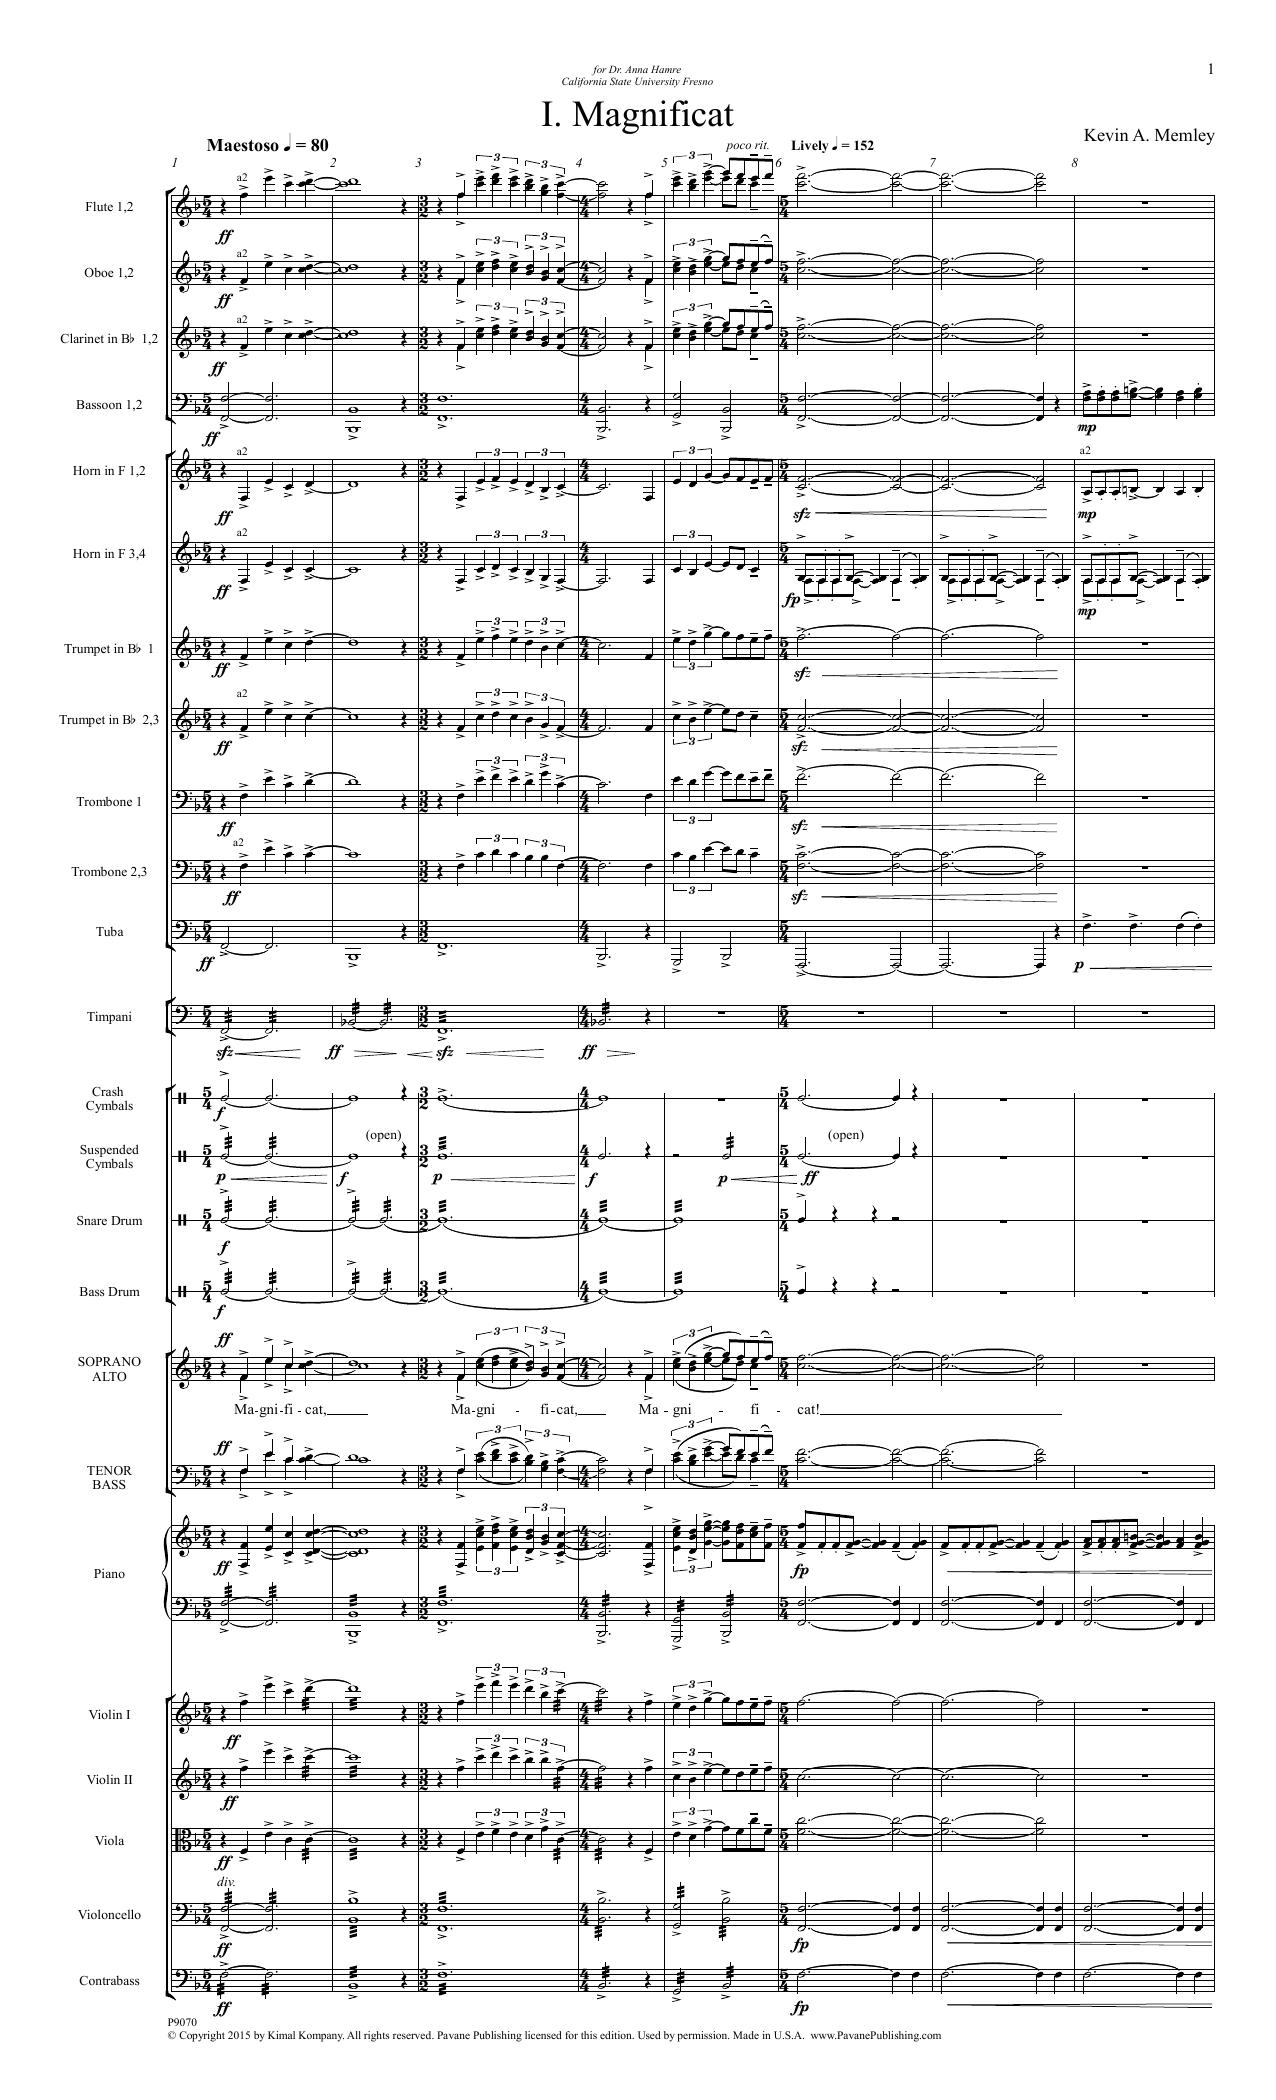 Download Kevin A. Memley Magnificat (Full Orchestra) (Score) - F Sheet Music